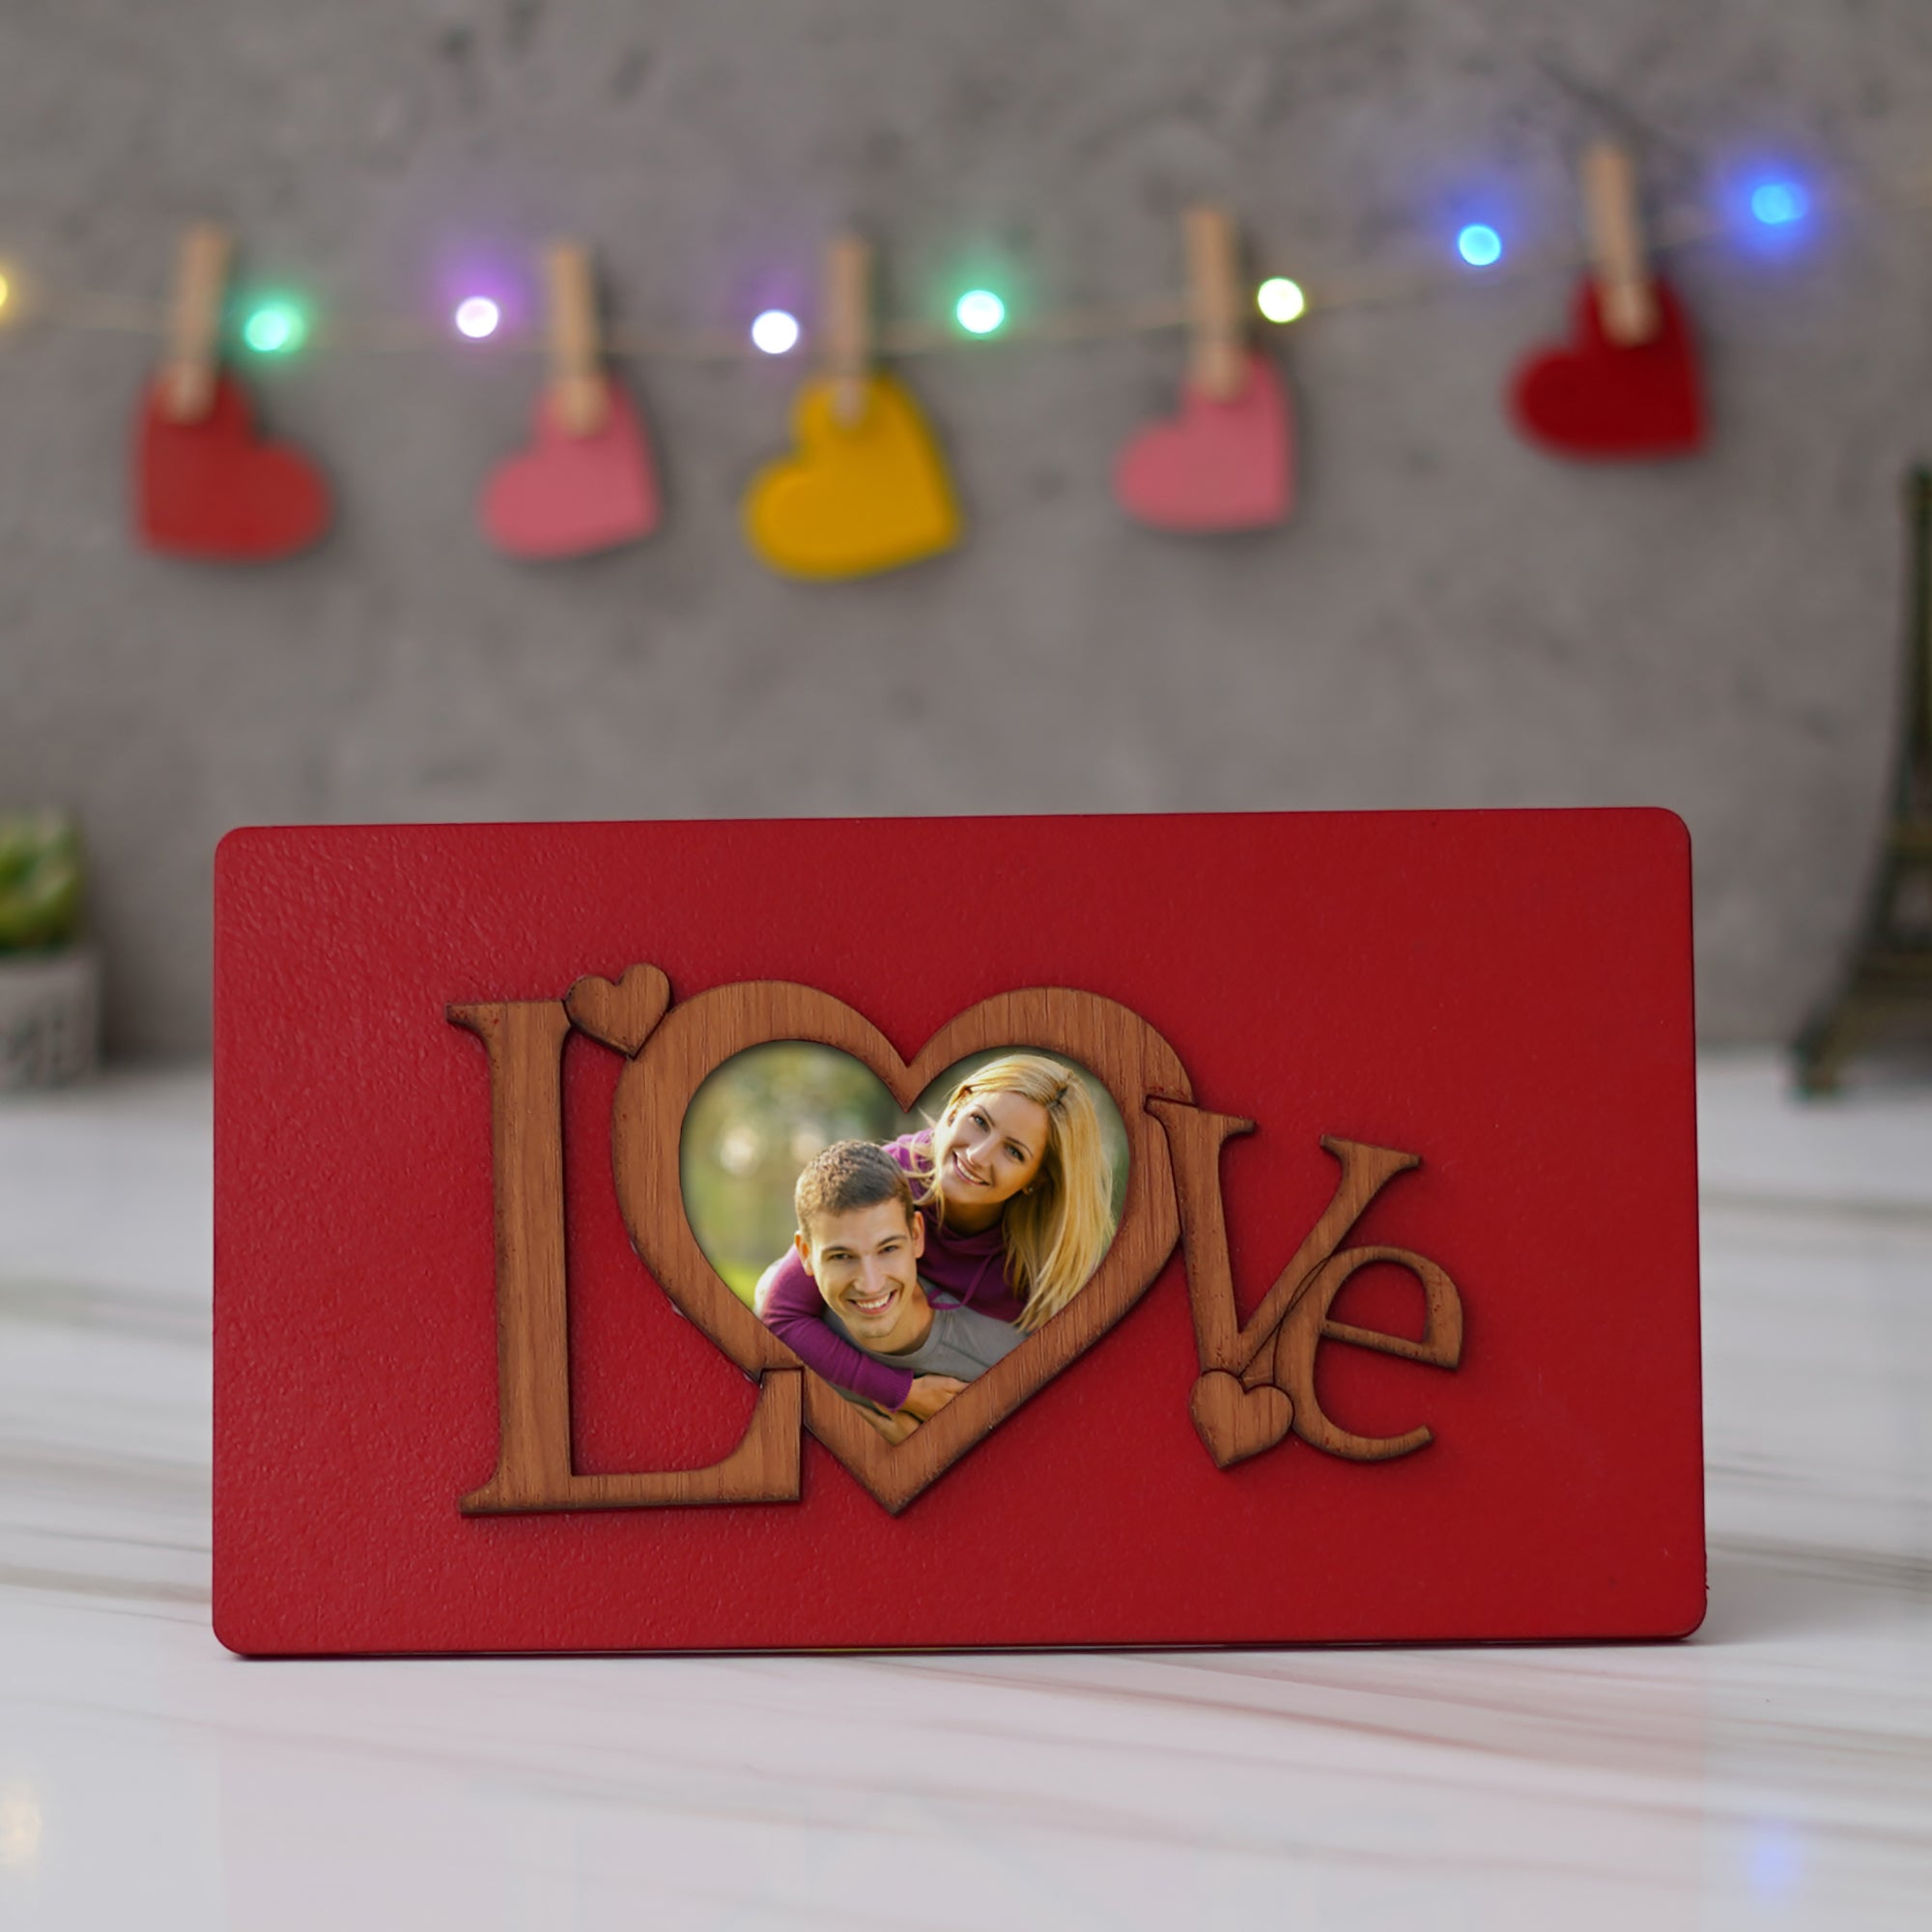 Valentine Combo of "Love" Wooden Photo Frame With Red Stand, Pink Heart Shaped Gift Box with Teddy and Roses 1